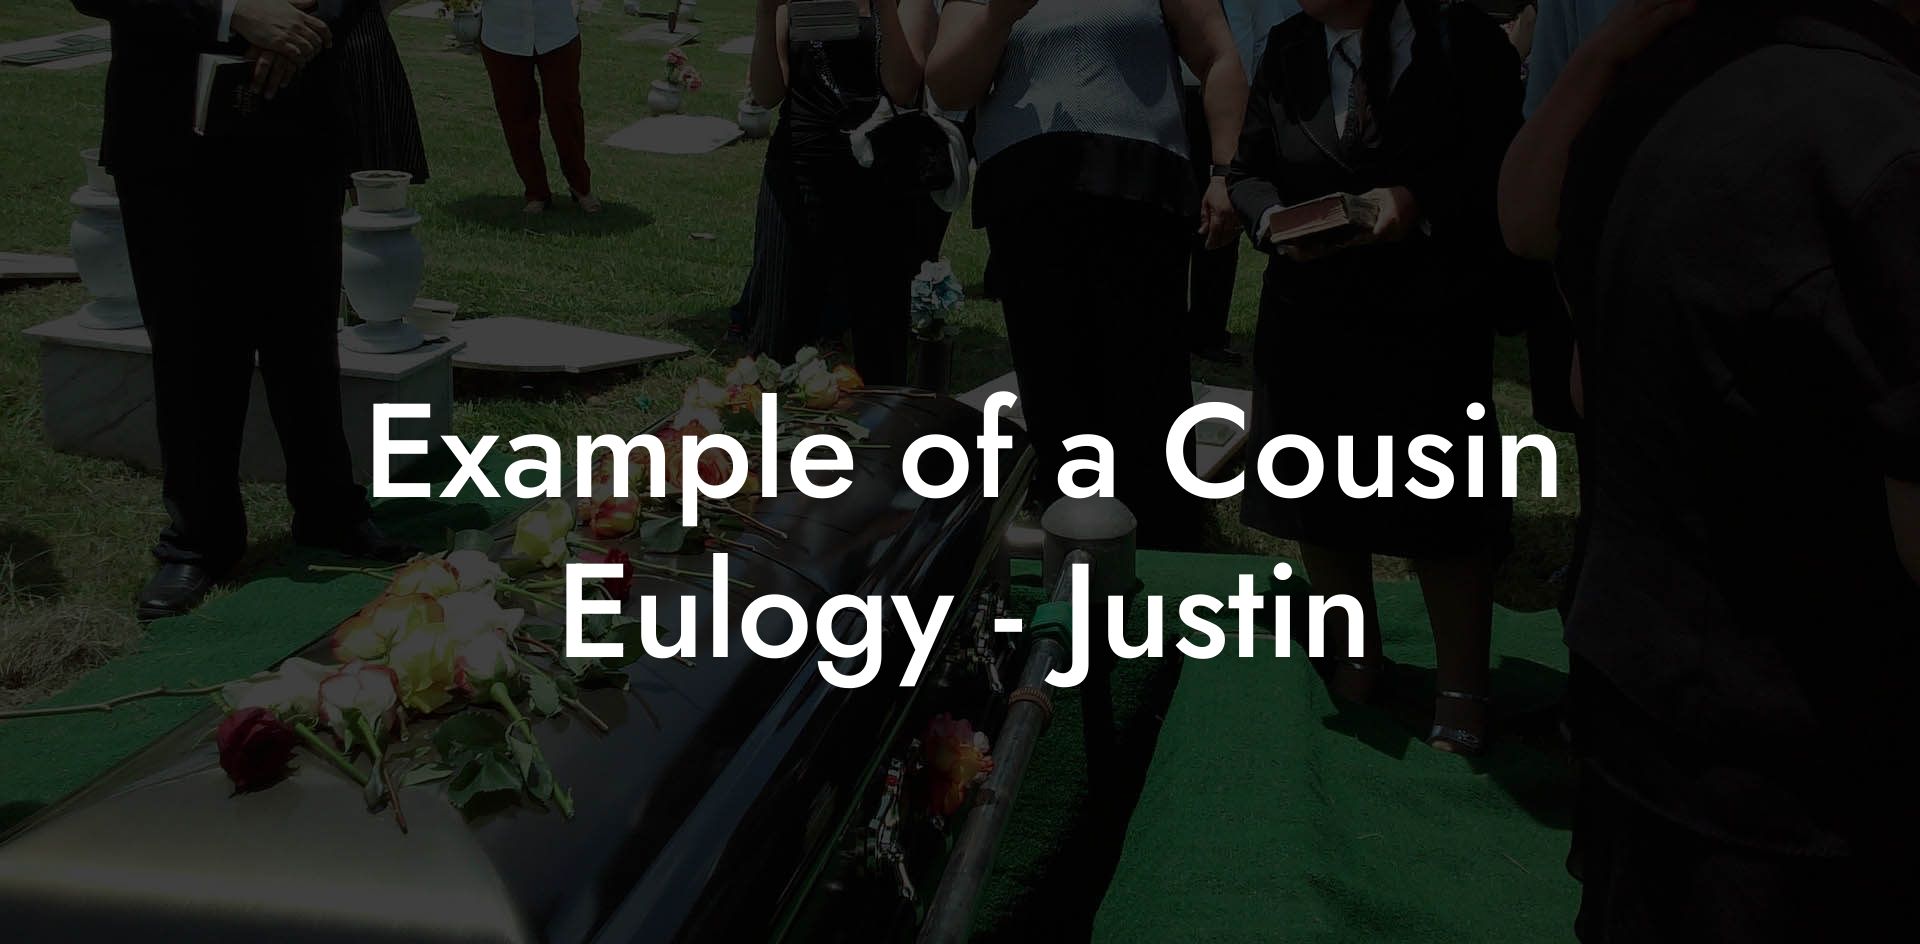 Example of a Cousin Eulogy - Justin